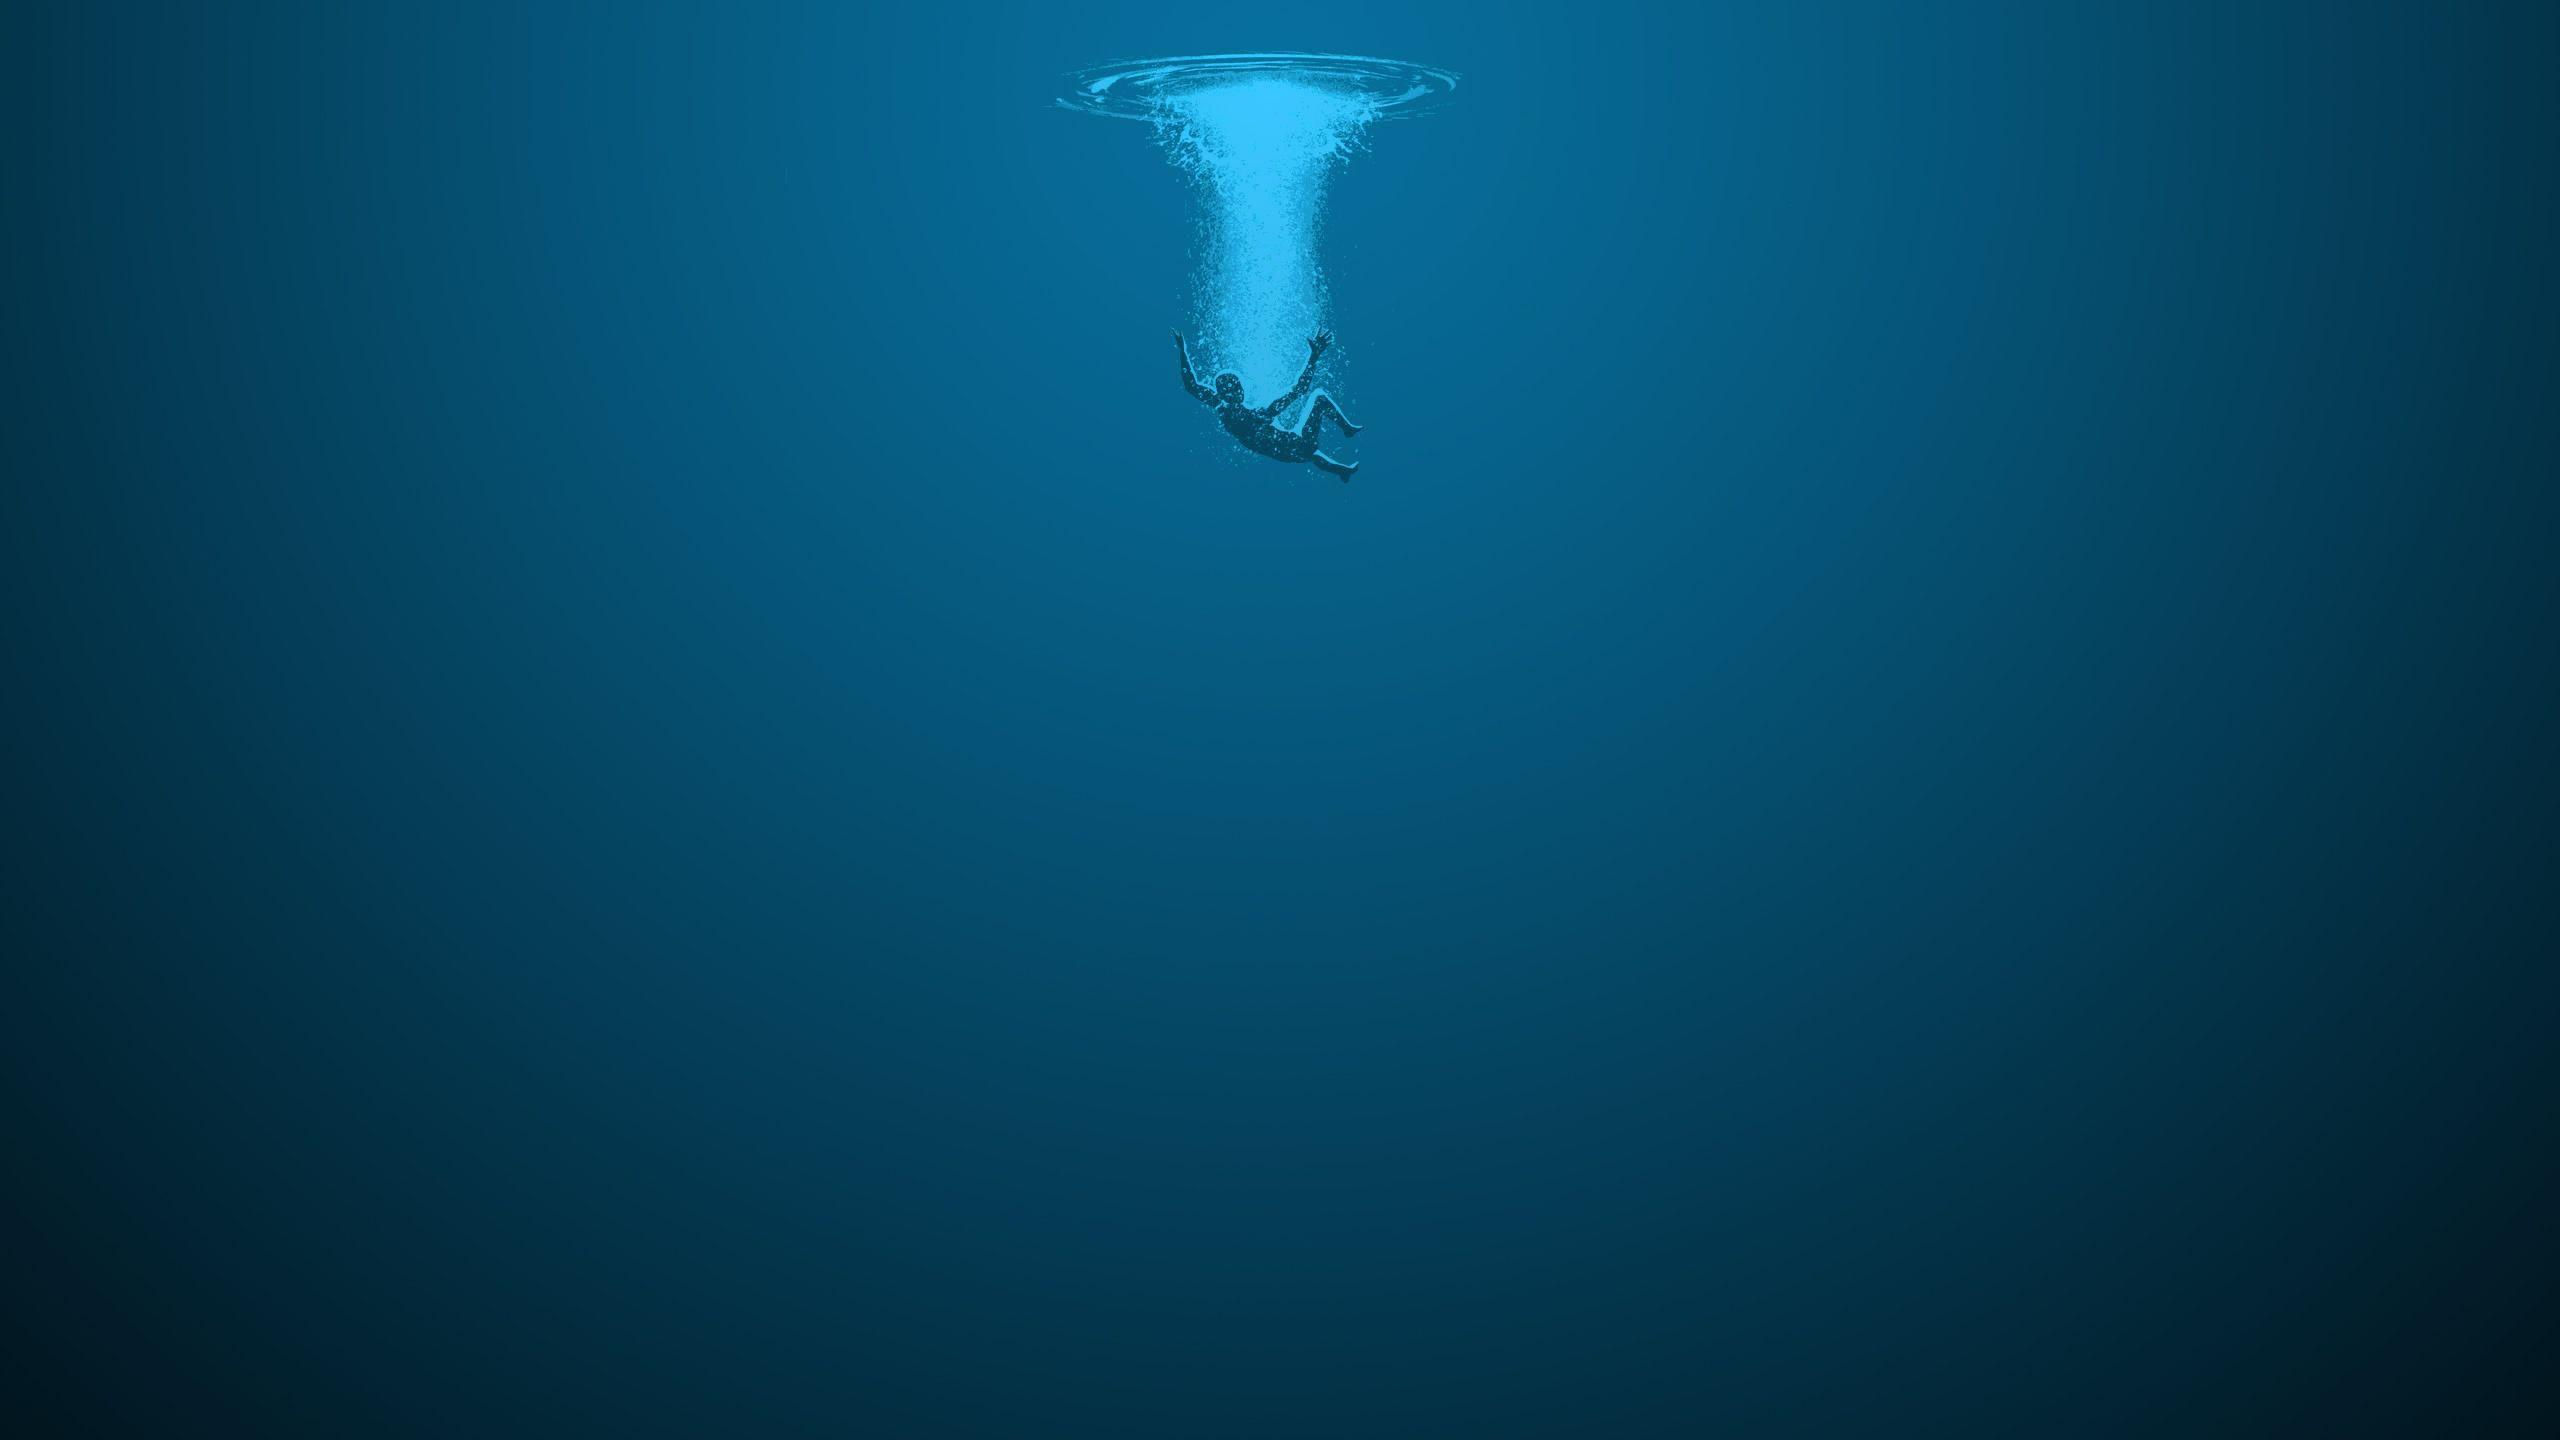 Request] Wallpapers of a man plunging into deep sea : wallpapers